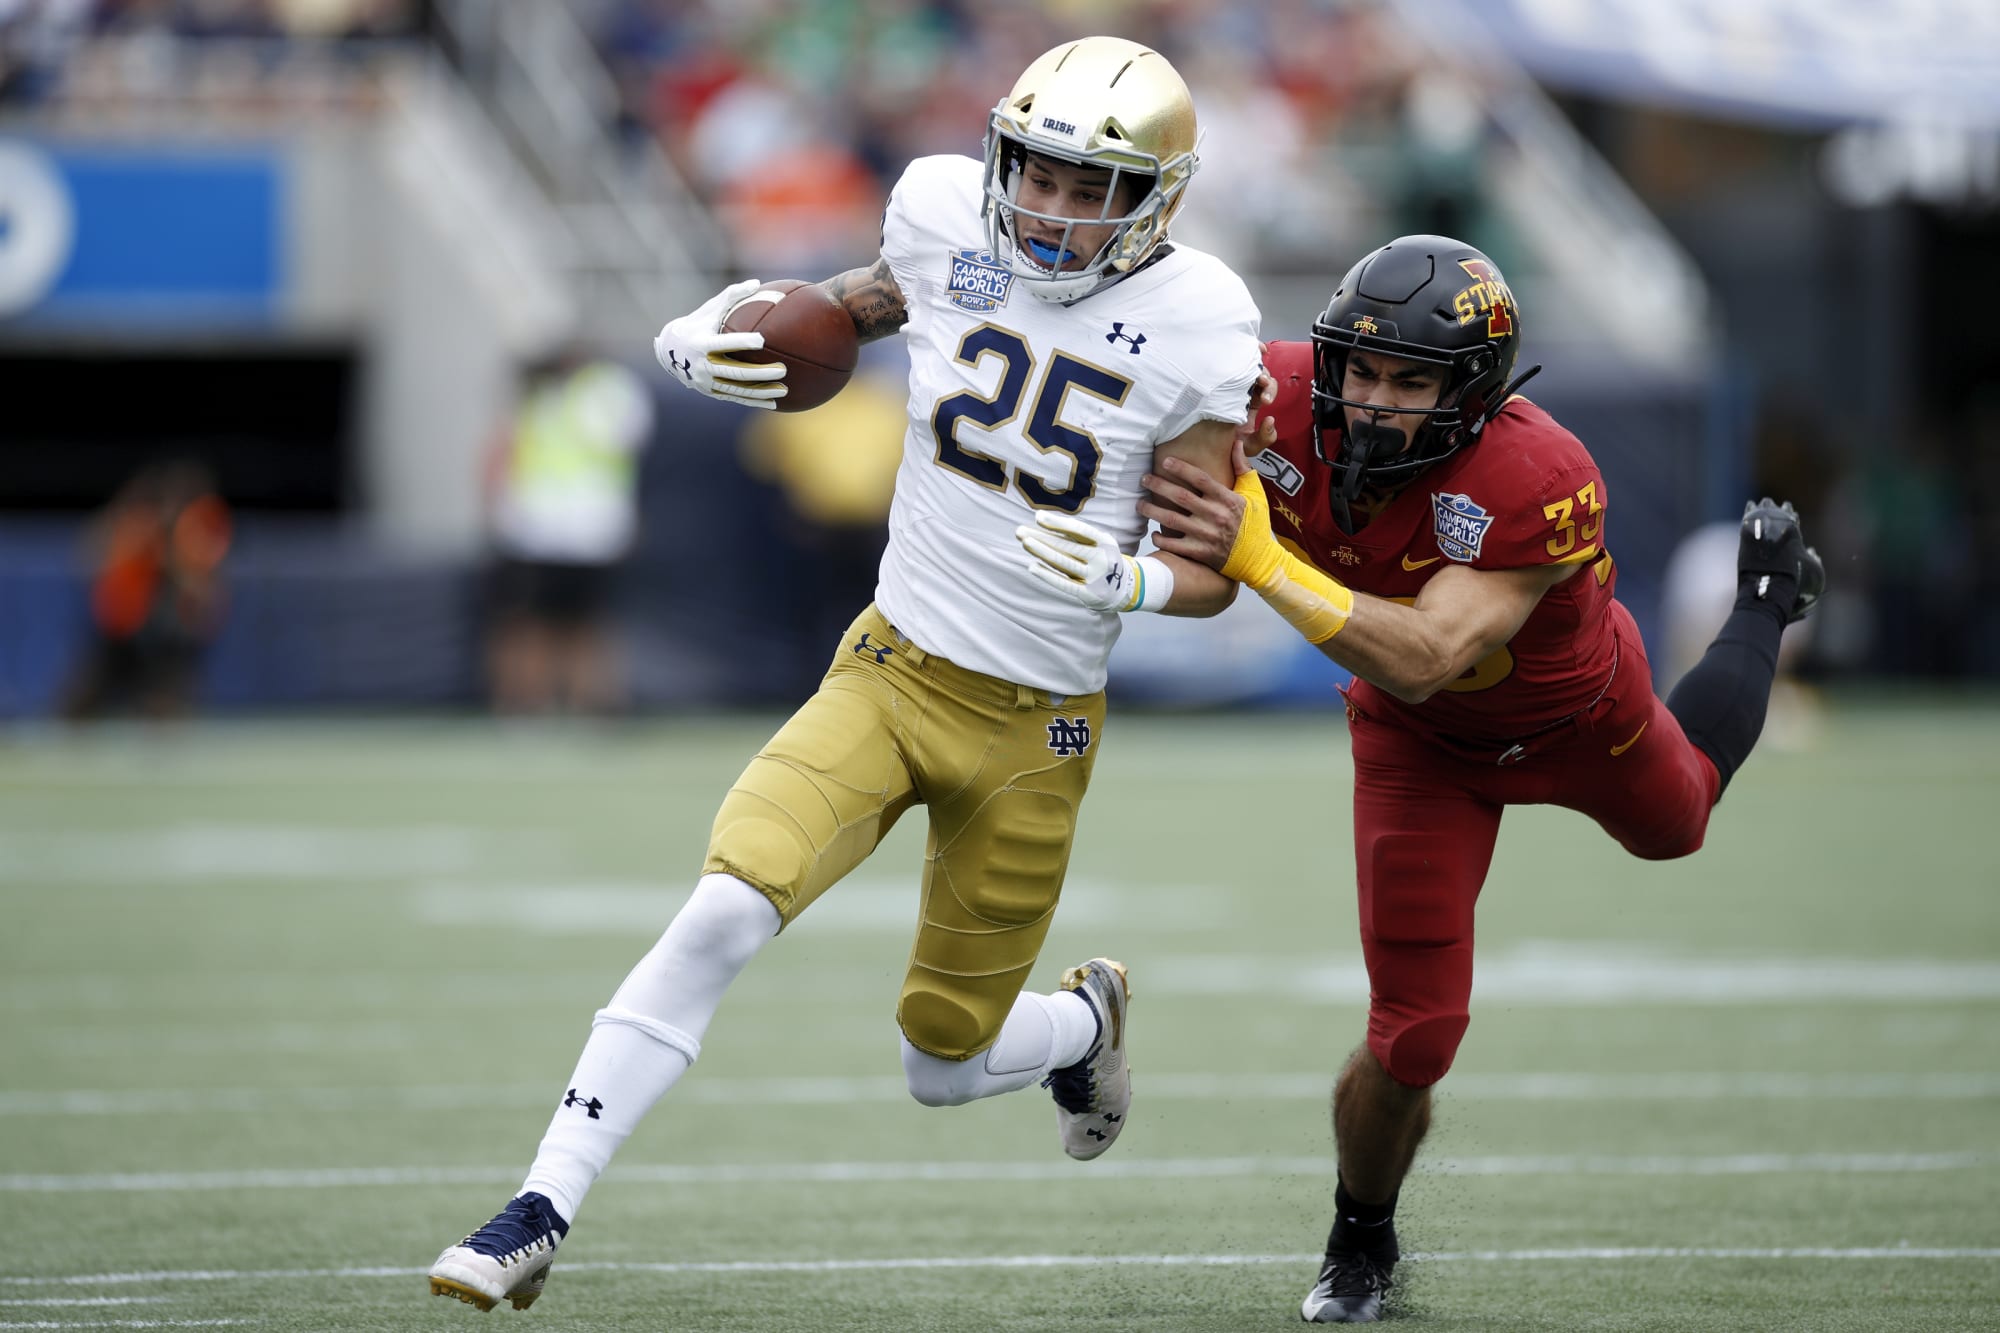 Notre Dame Football: Could some players could consider sitting out season?